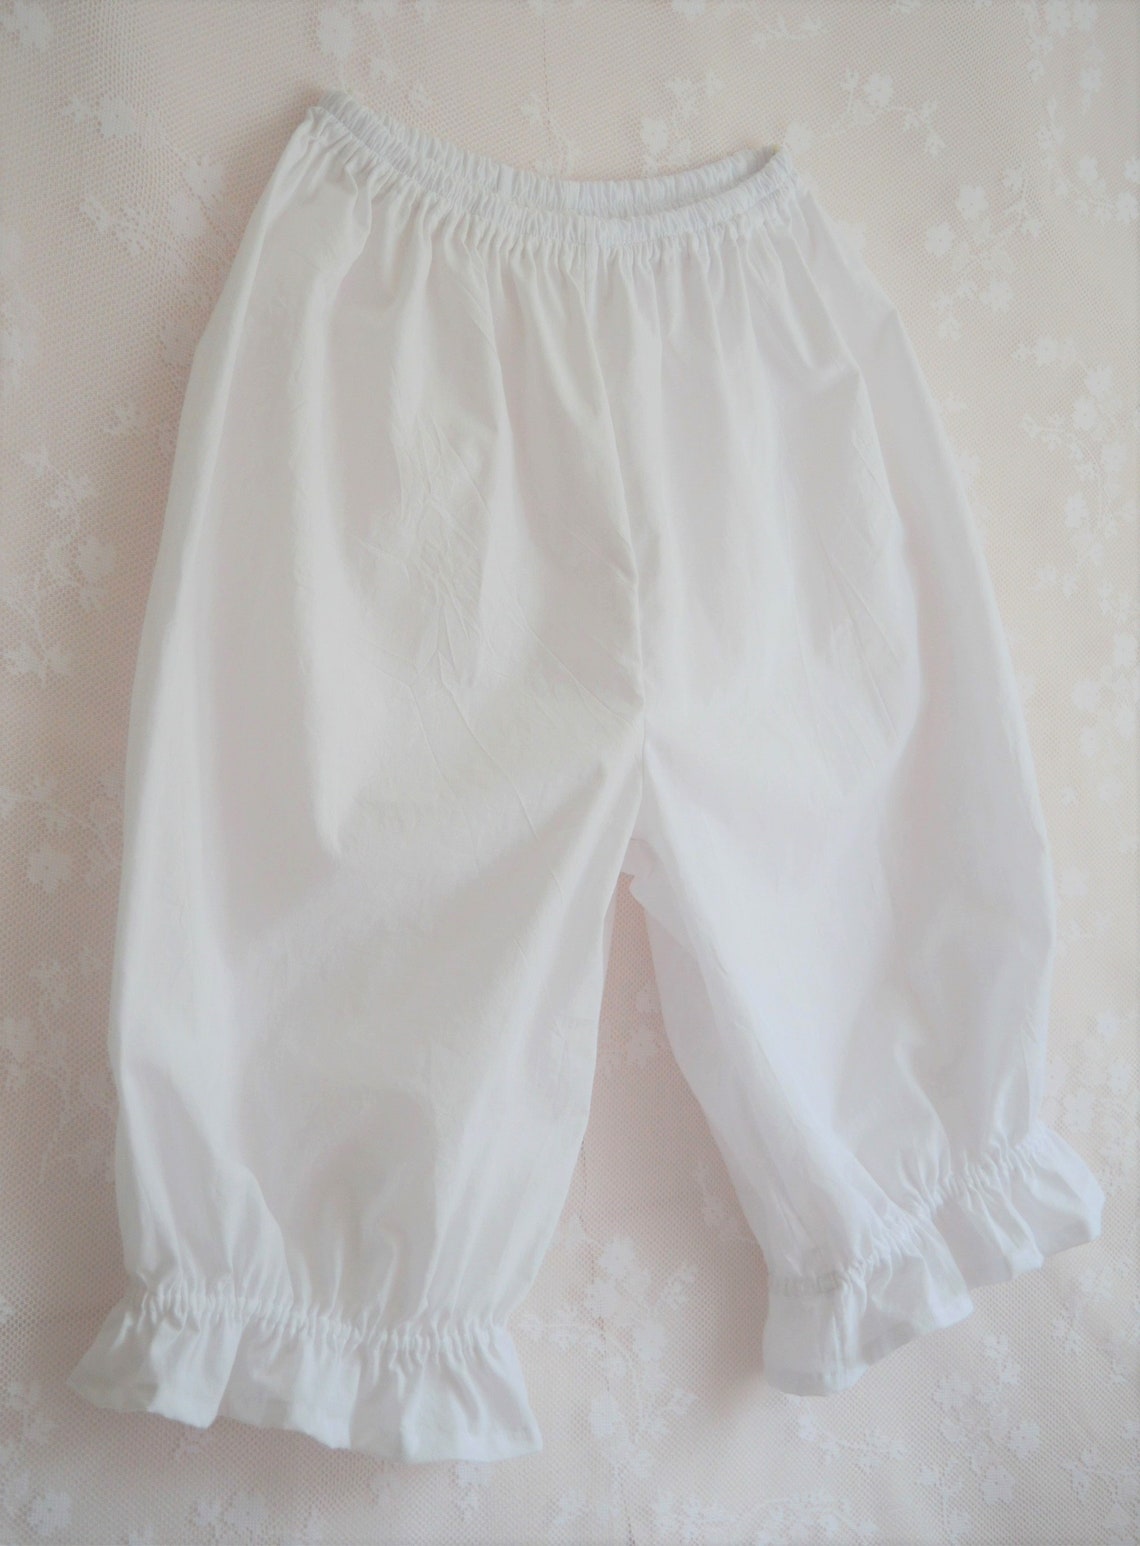 Victorian bloomers white white below-the-knee bloomers white | Etsy